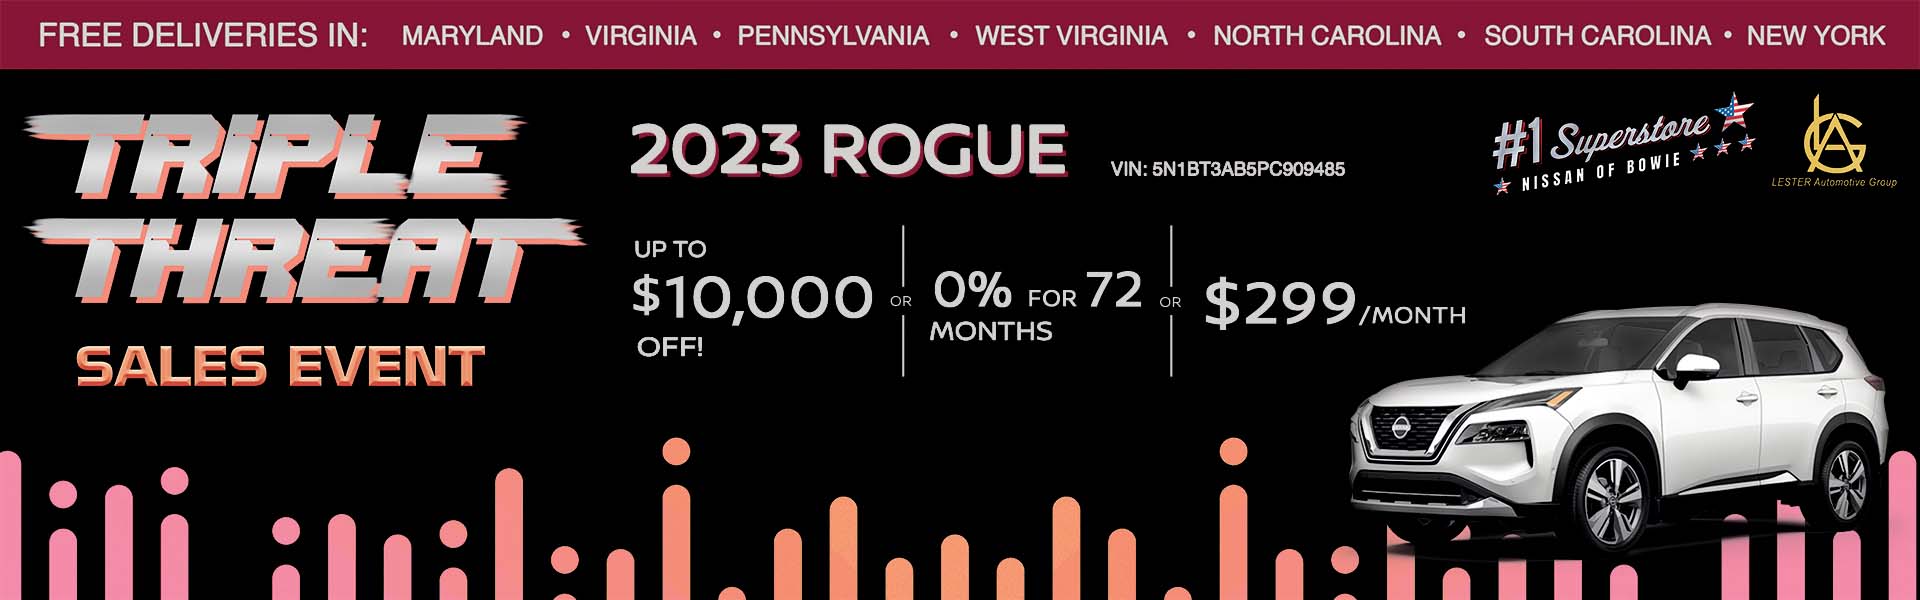 Rogue lease for $299. 